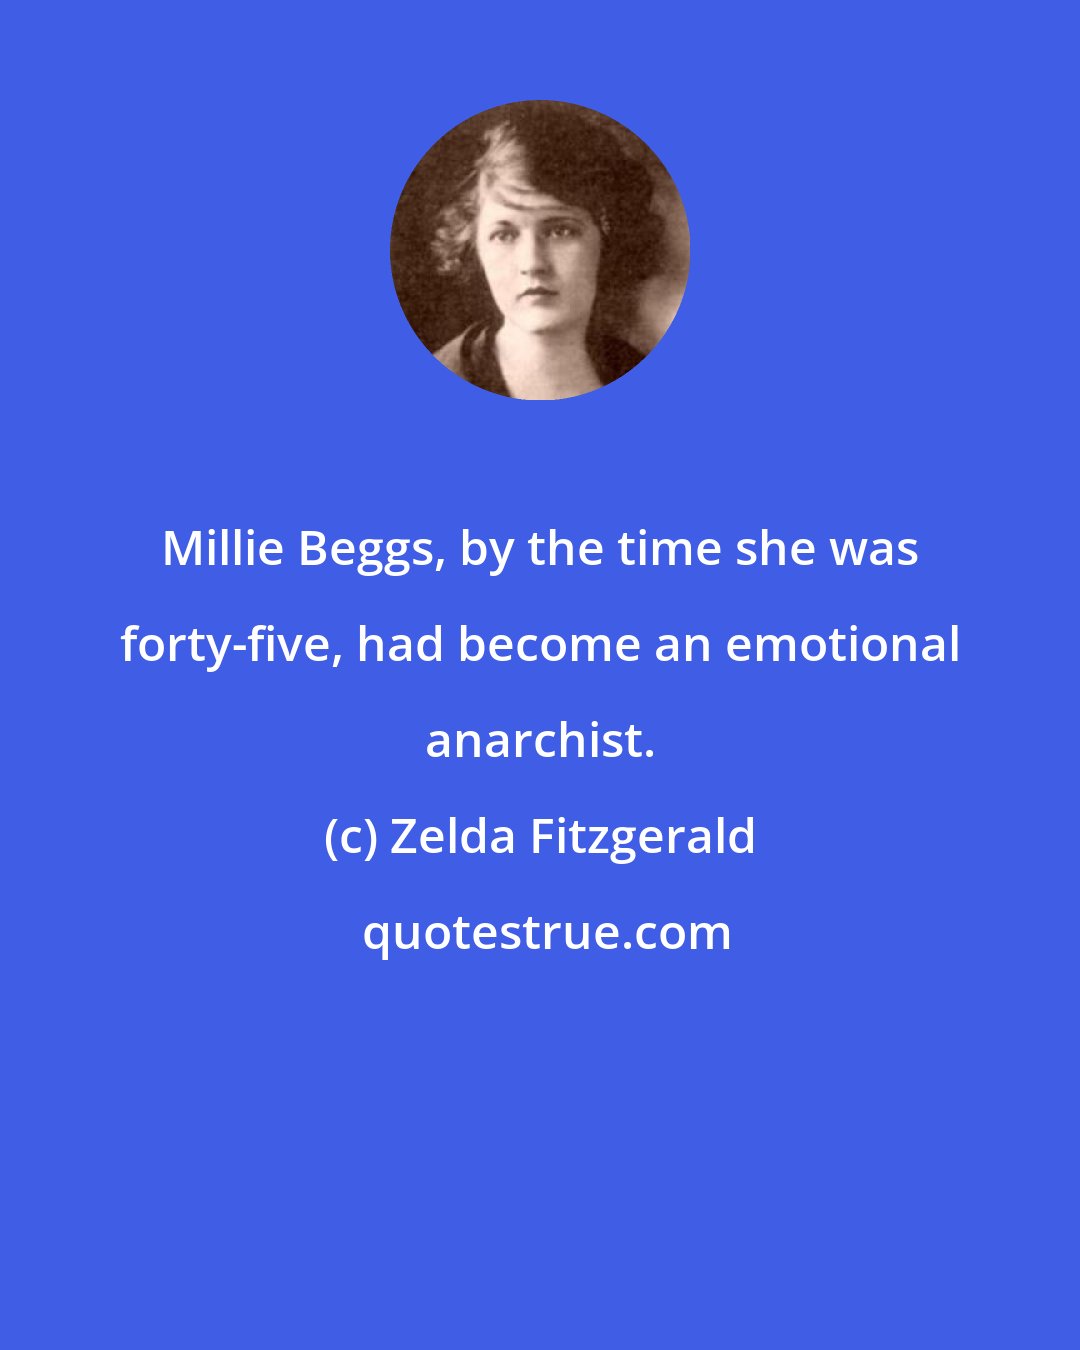 Zelda Fitzgerald: Millie Beggs, by the time she was forty-five, had become an emotional anarchist.